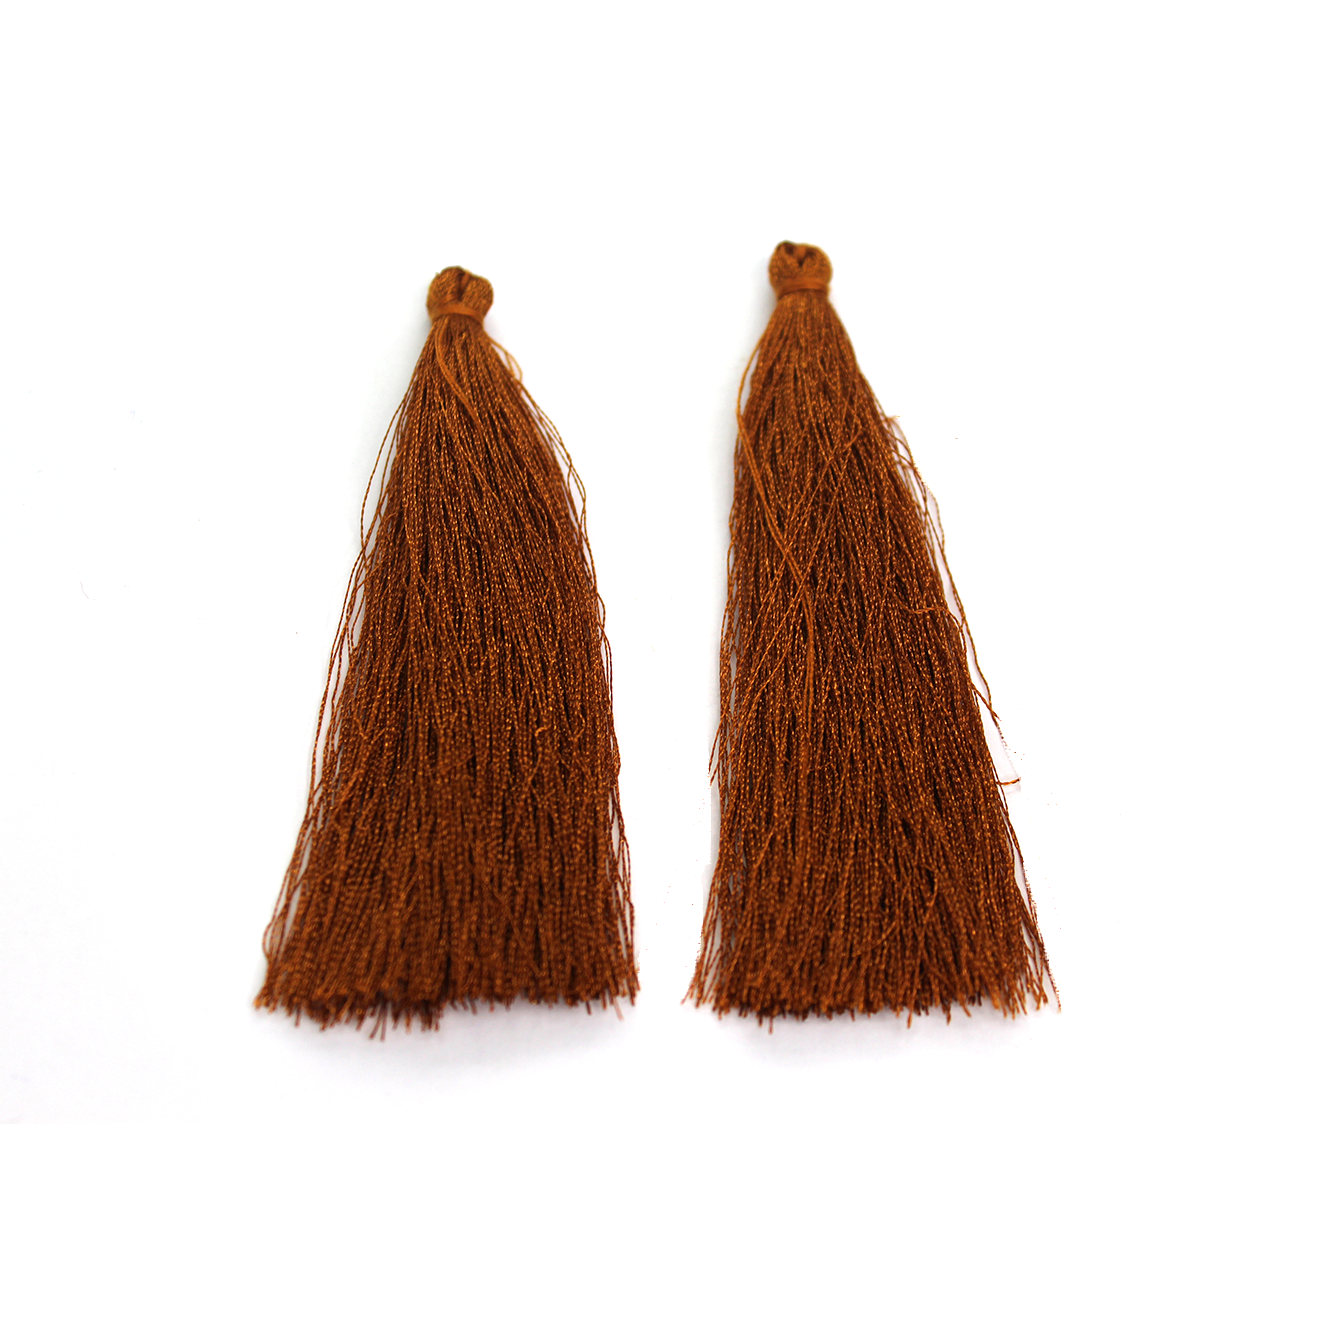 Tassels, Silk Thread, 3.5 inch, 5pcs, Available in 5 colors